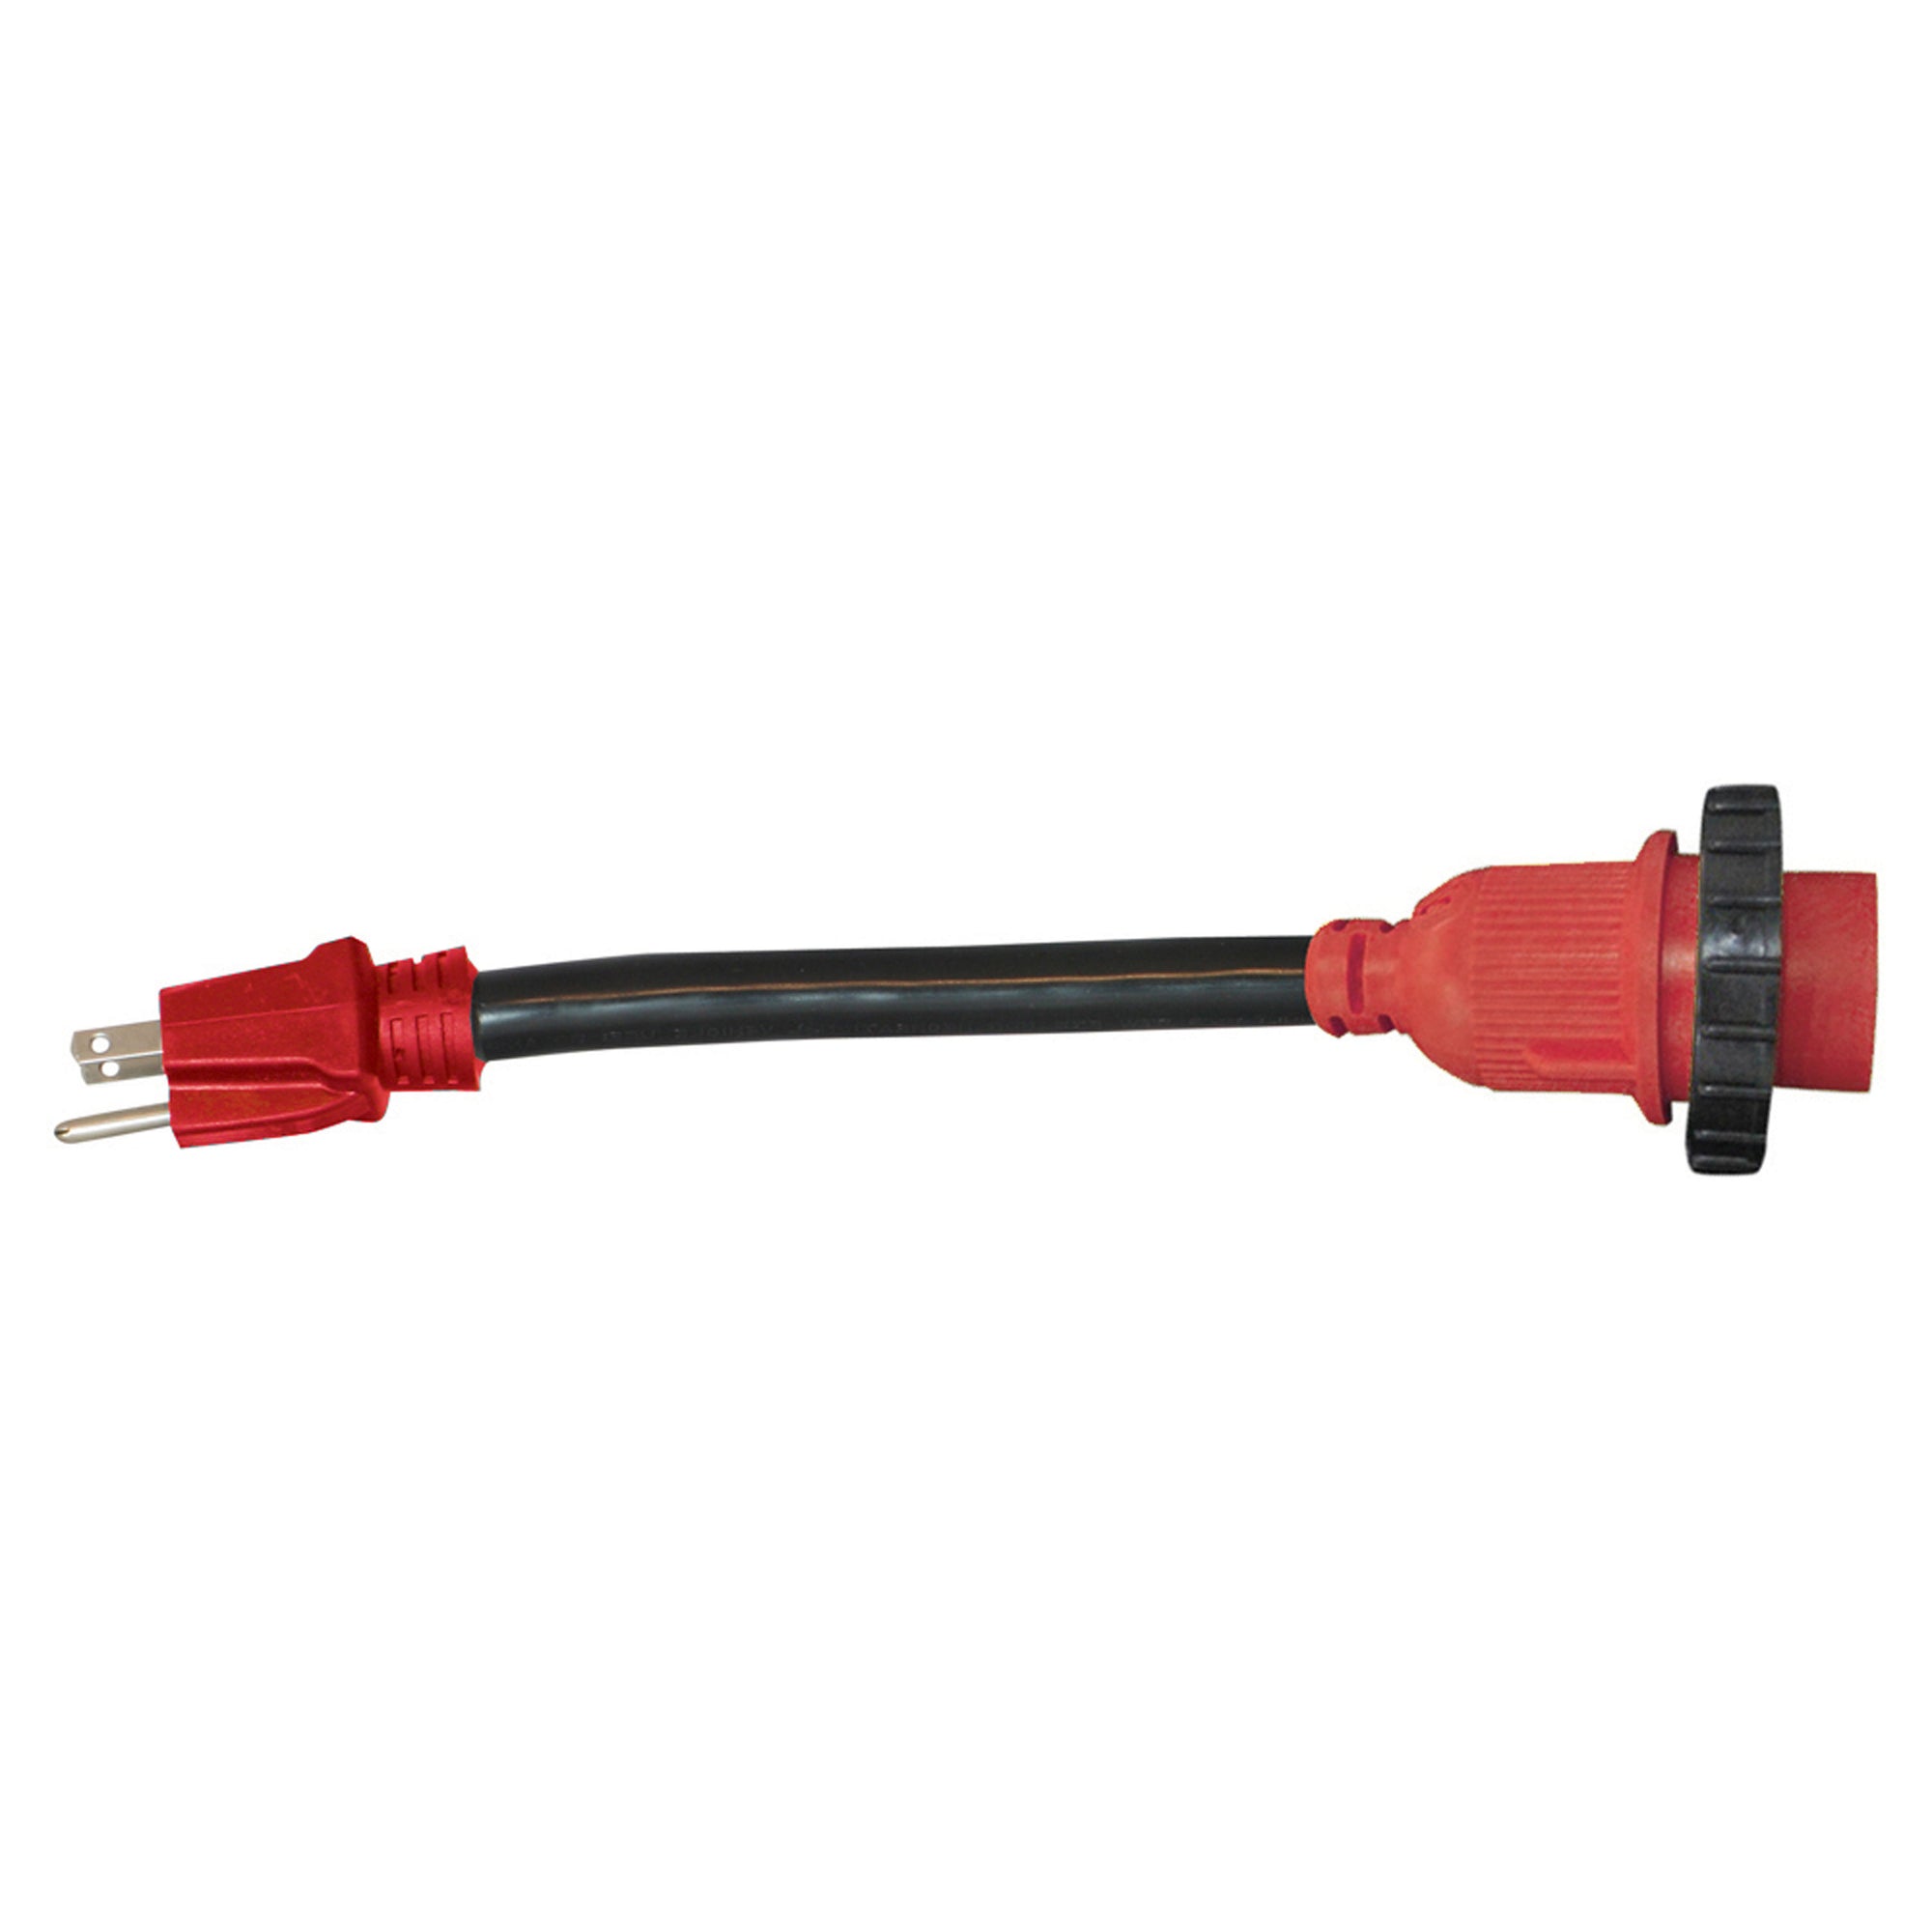 Valterra A10-1530DVP Mighty Cord Detachable 12" Locking Adapter Cord - 15AM to 30AF, Red (Carded)